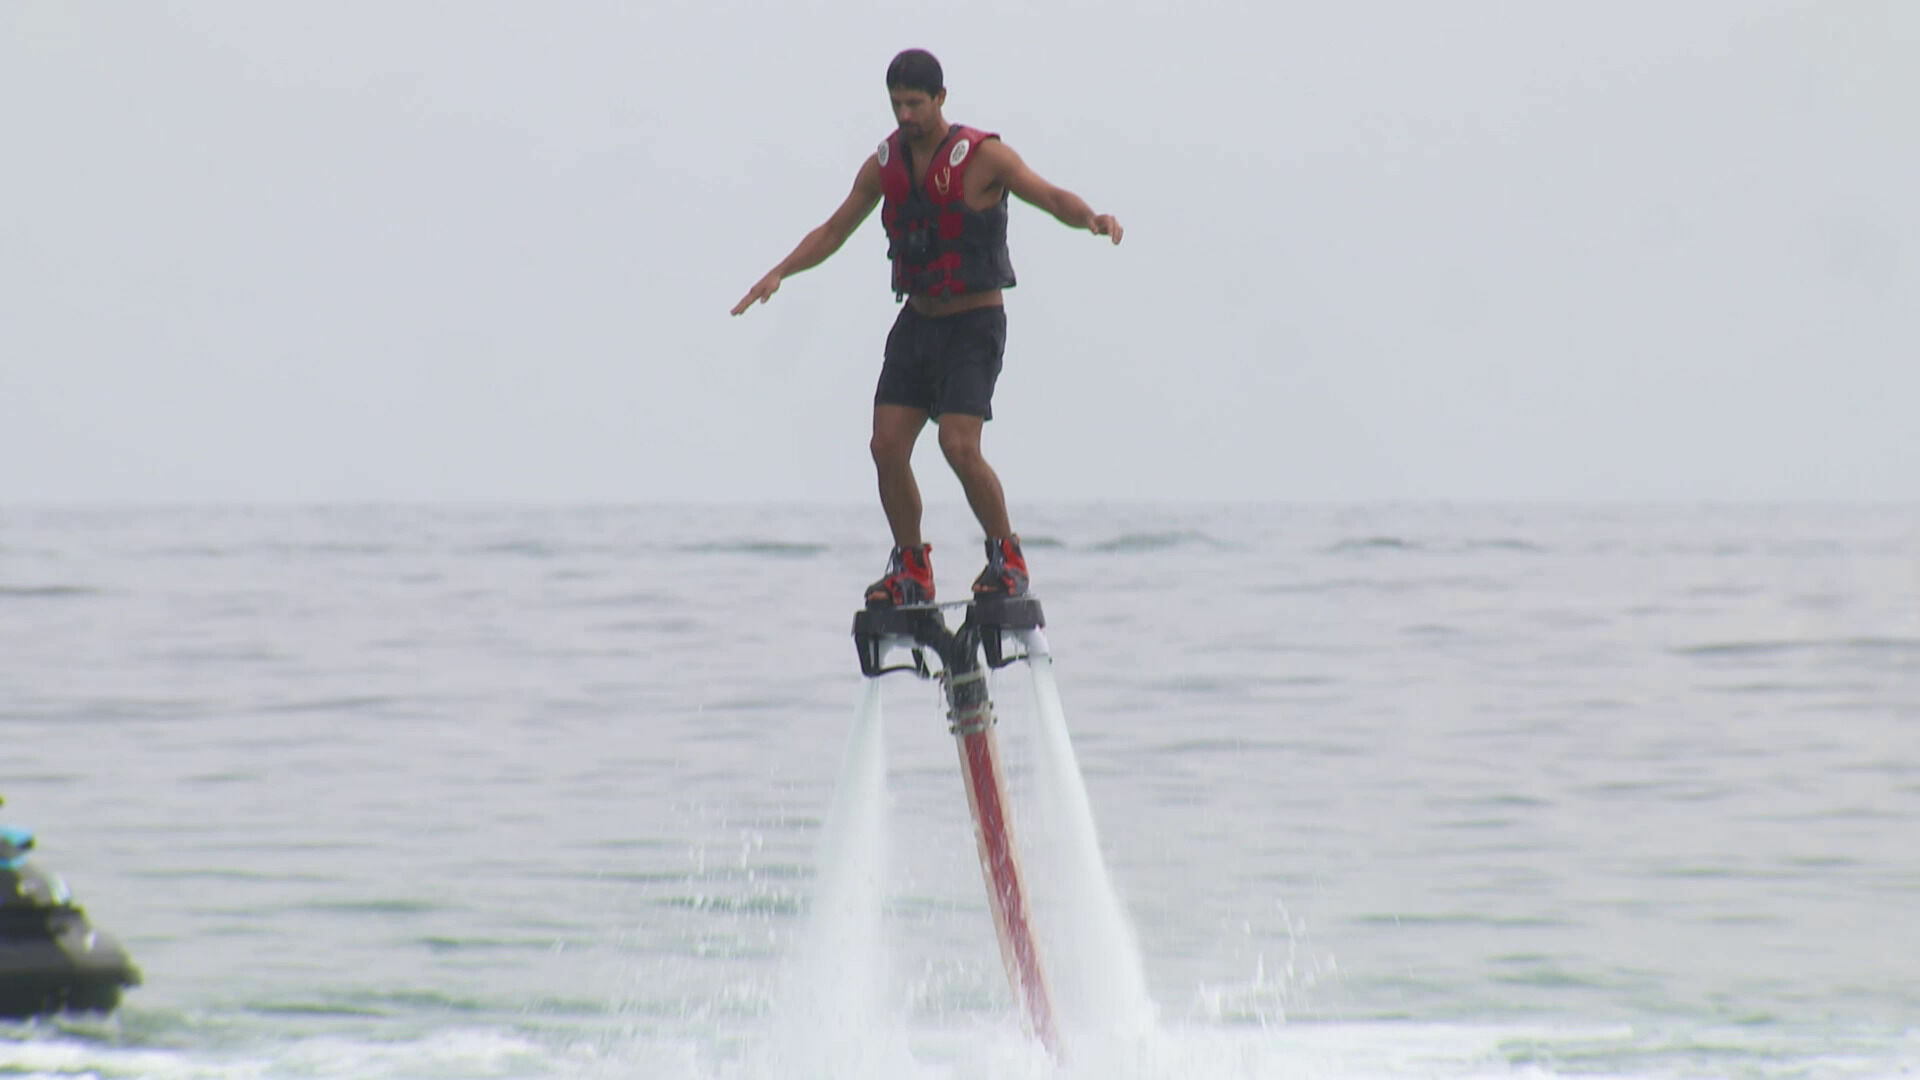 Welcome to Sanya: From racing to flyboarding